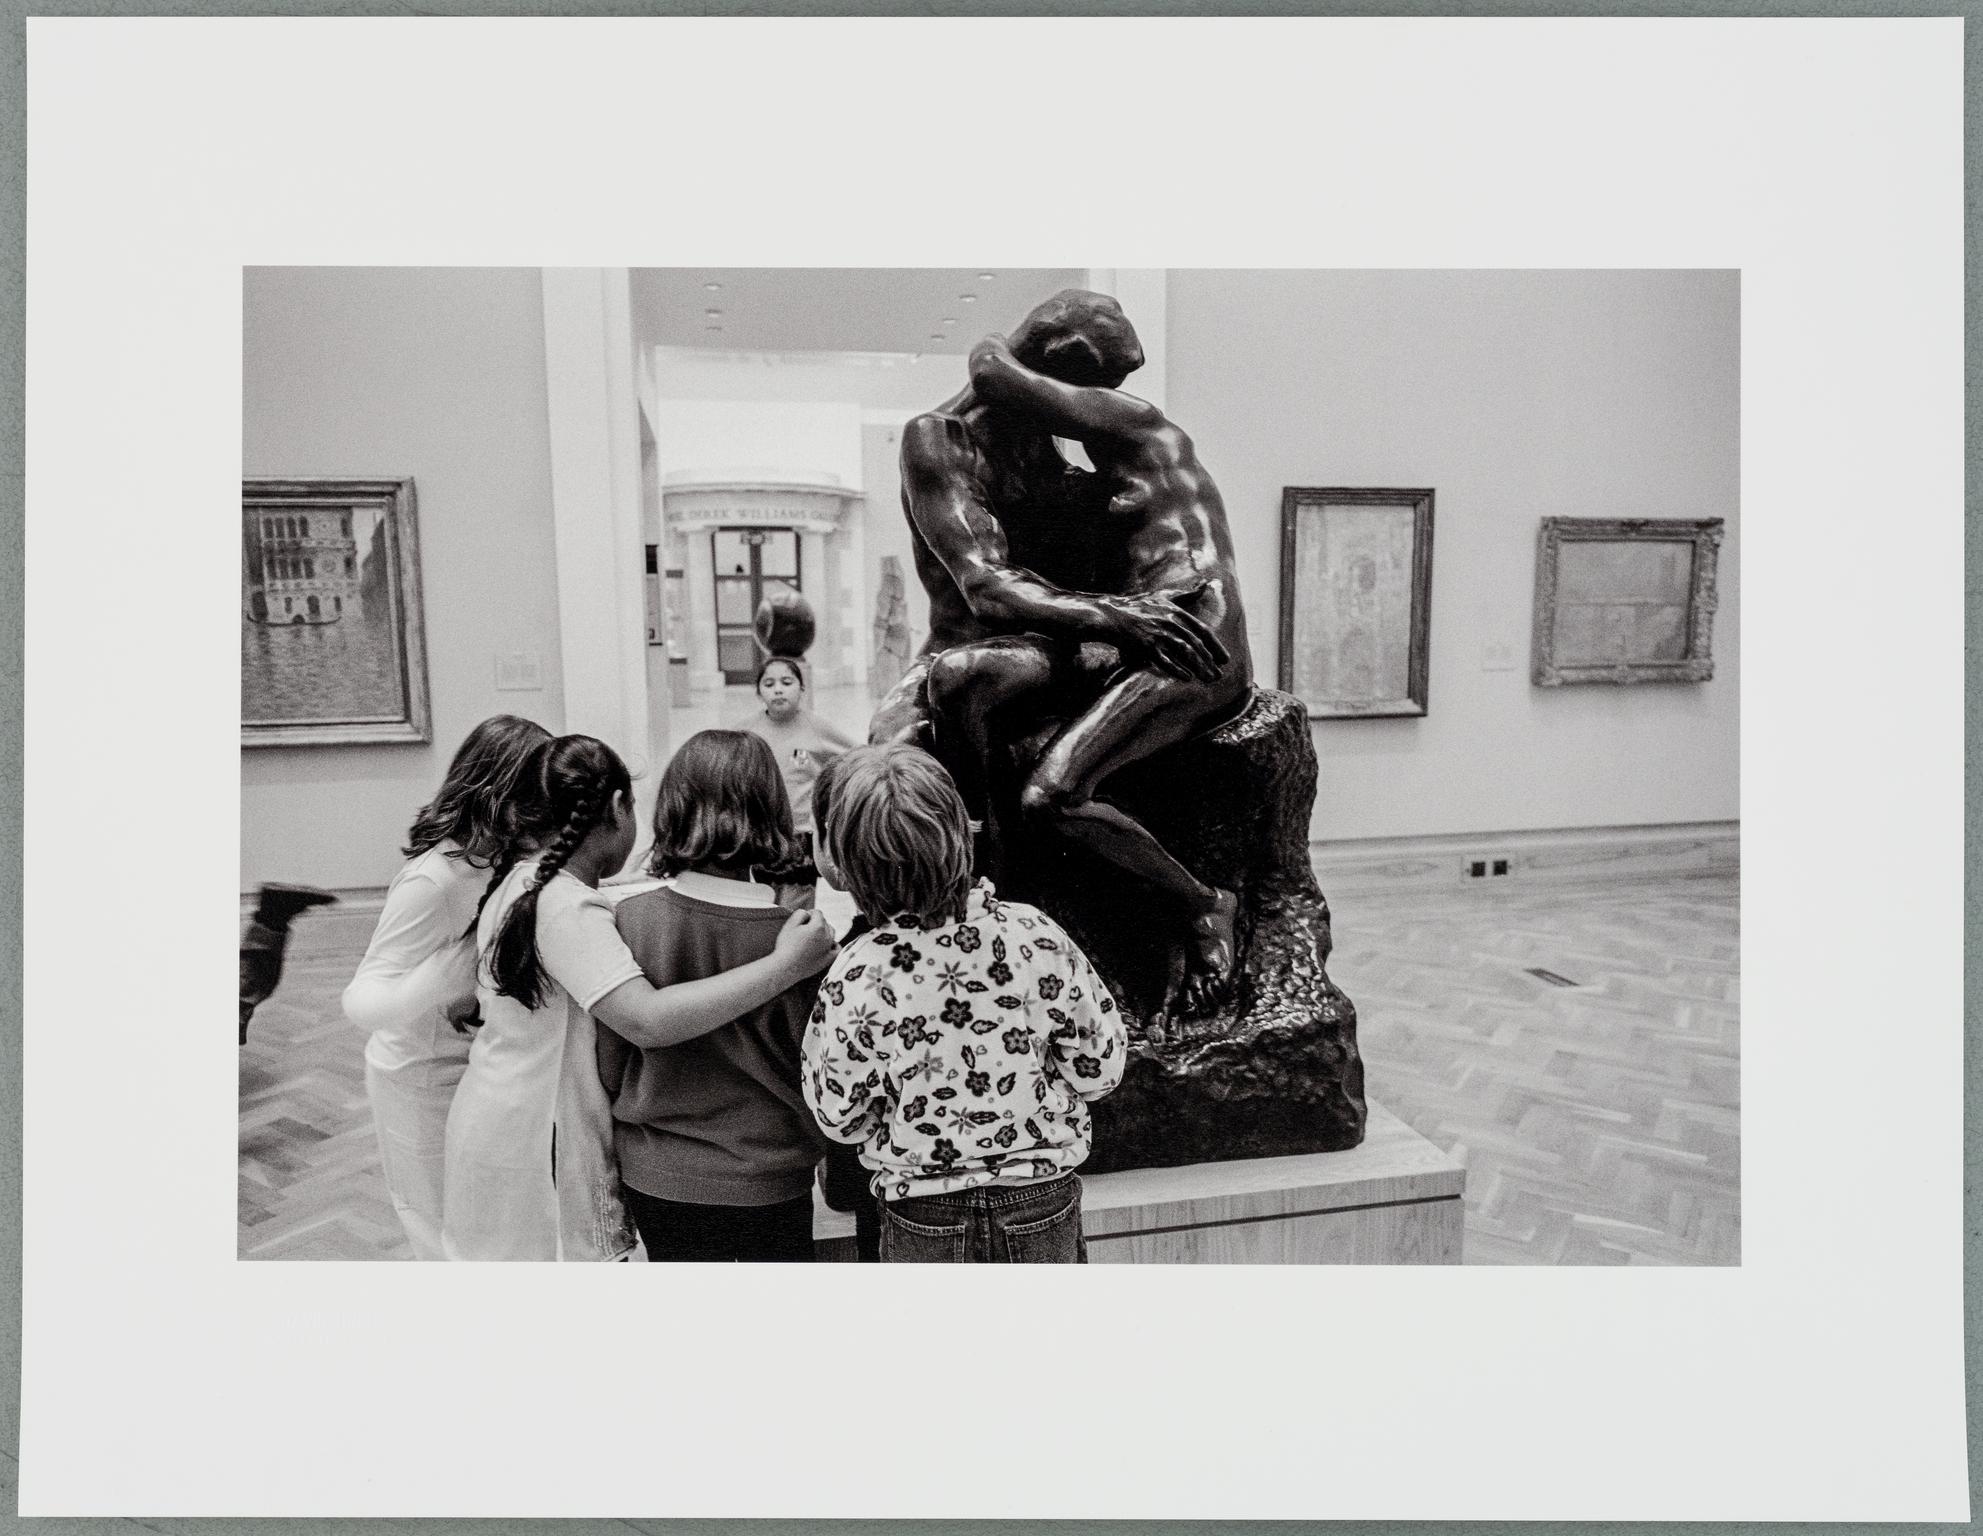 In the National Museum some students from a school party find interest in Rodin's sculpture 'The Kiss'. Cardiff, Wales